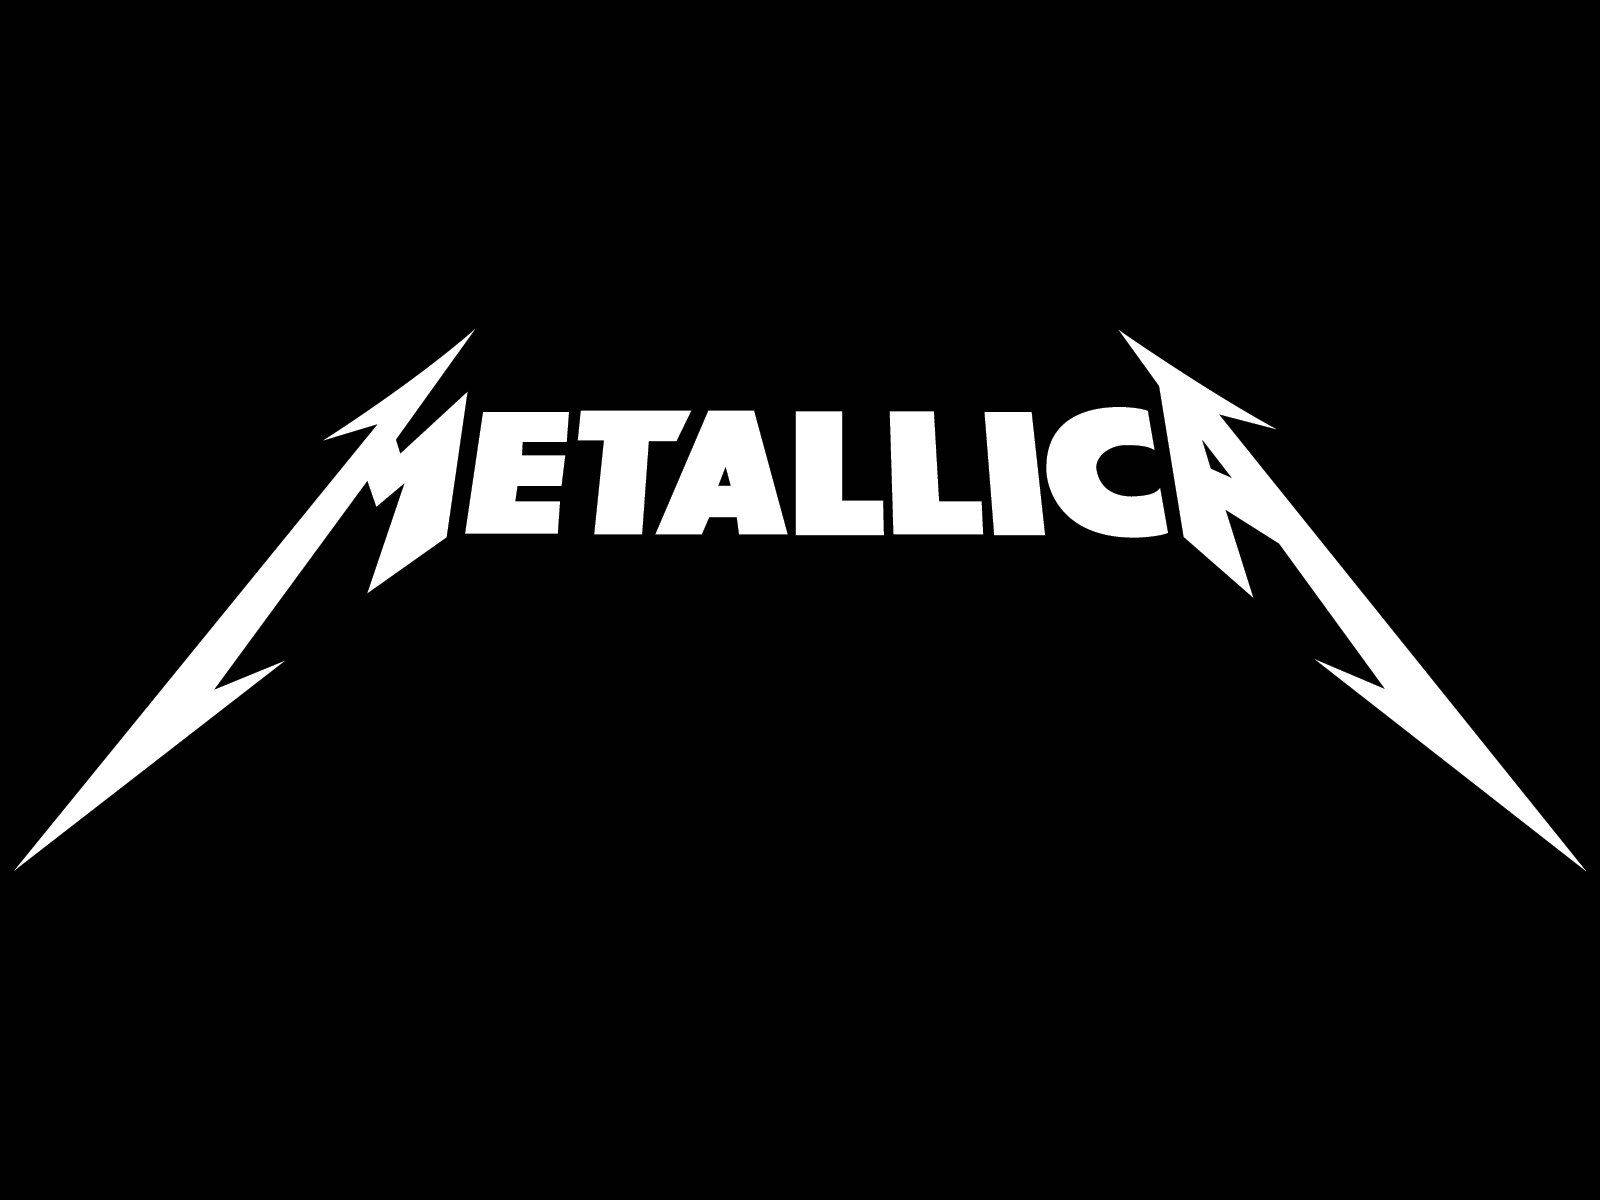 An iconic logo for rock pioneers Metallica. Wallpaper